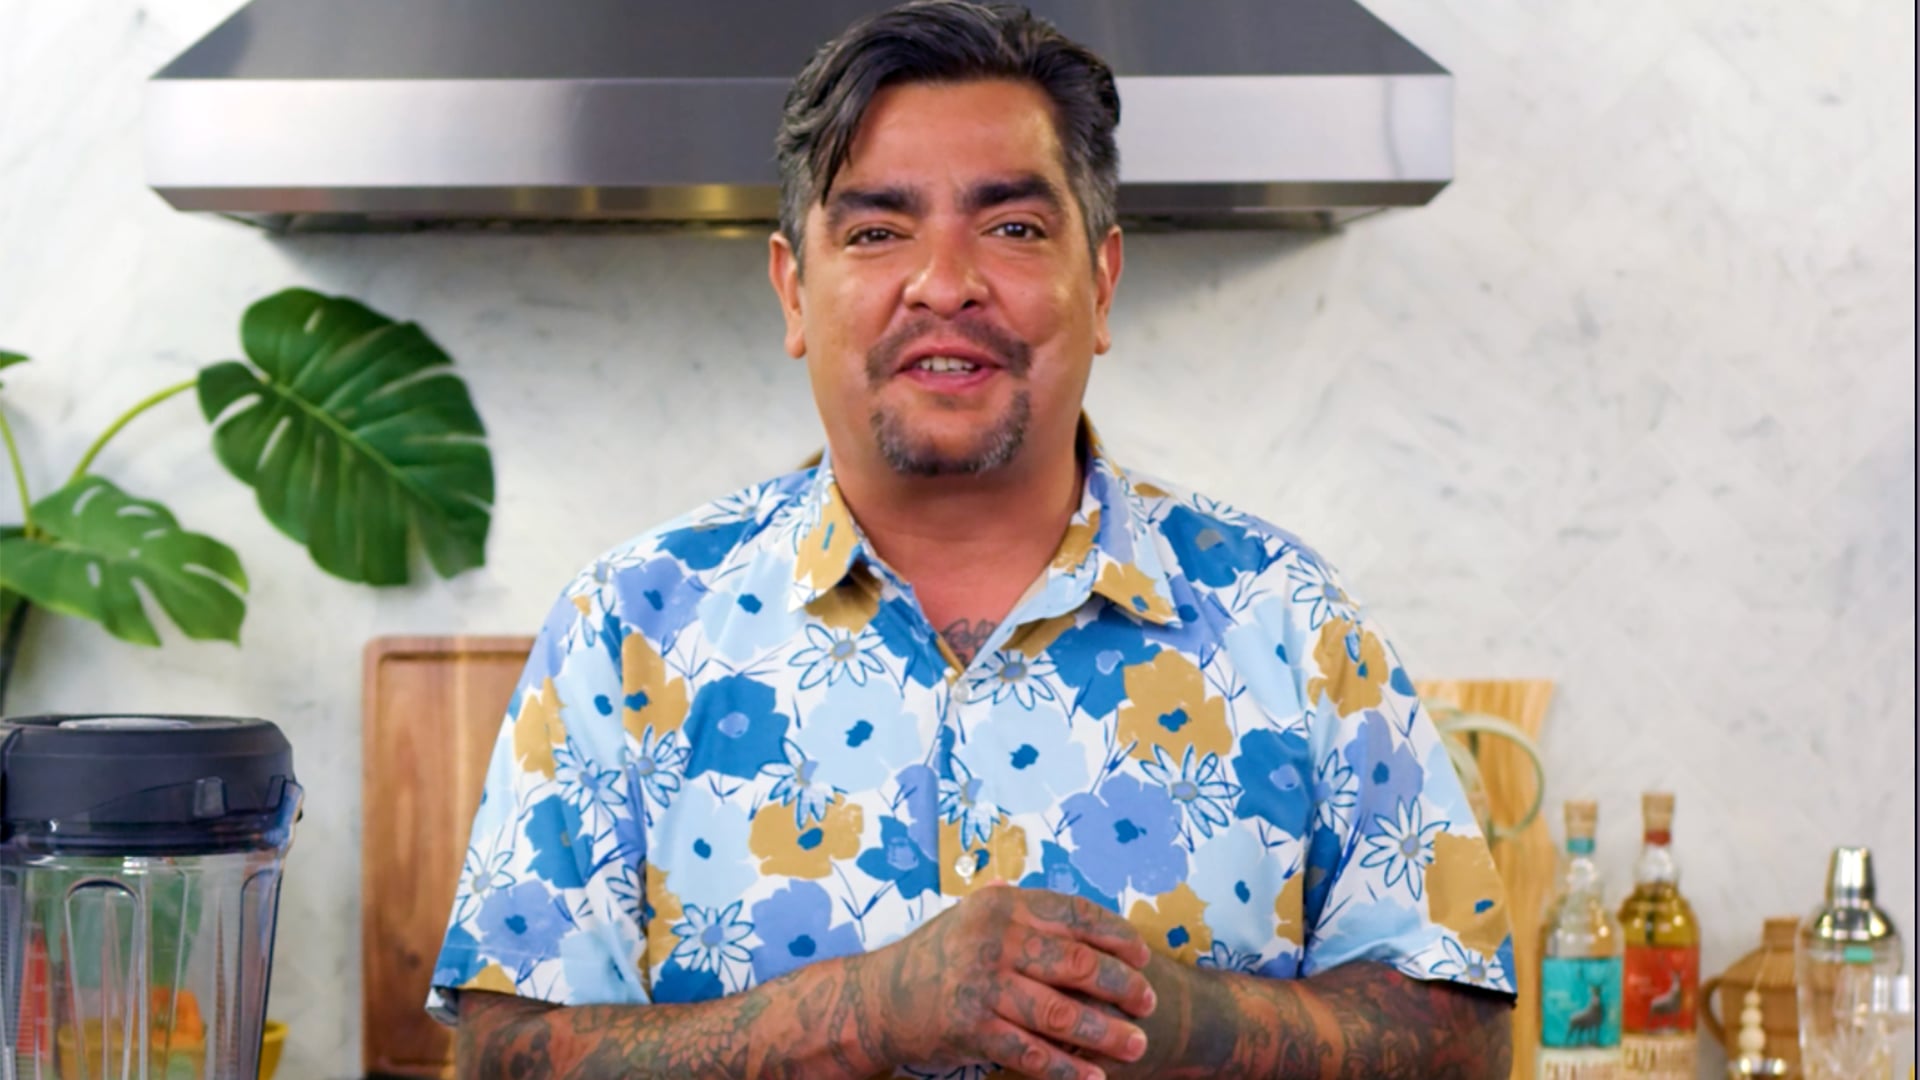 Chef Aaron stands with hands folded on a kitchen set. He wears a brightly colored floral shirt